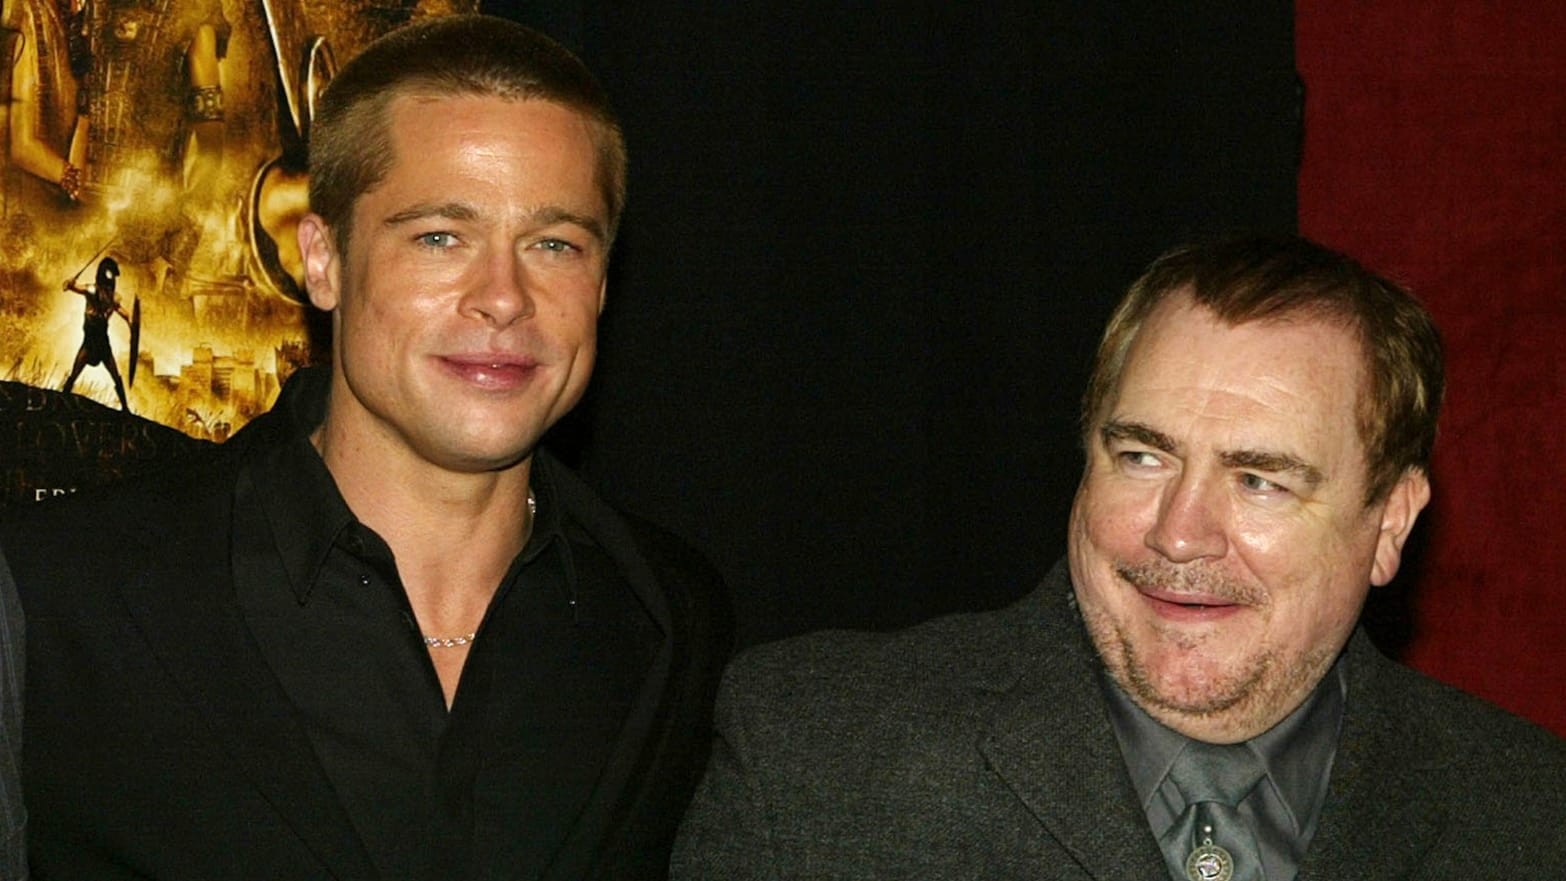 Brad Pitt and Brian Cox at a Troy event